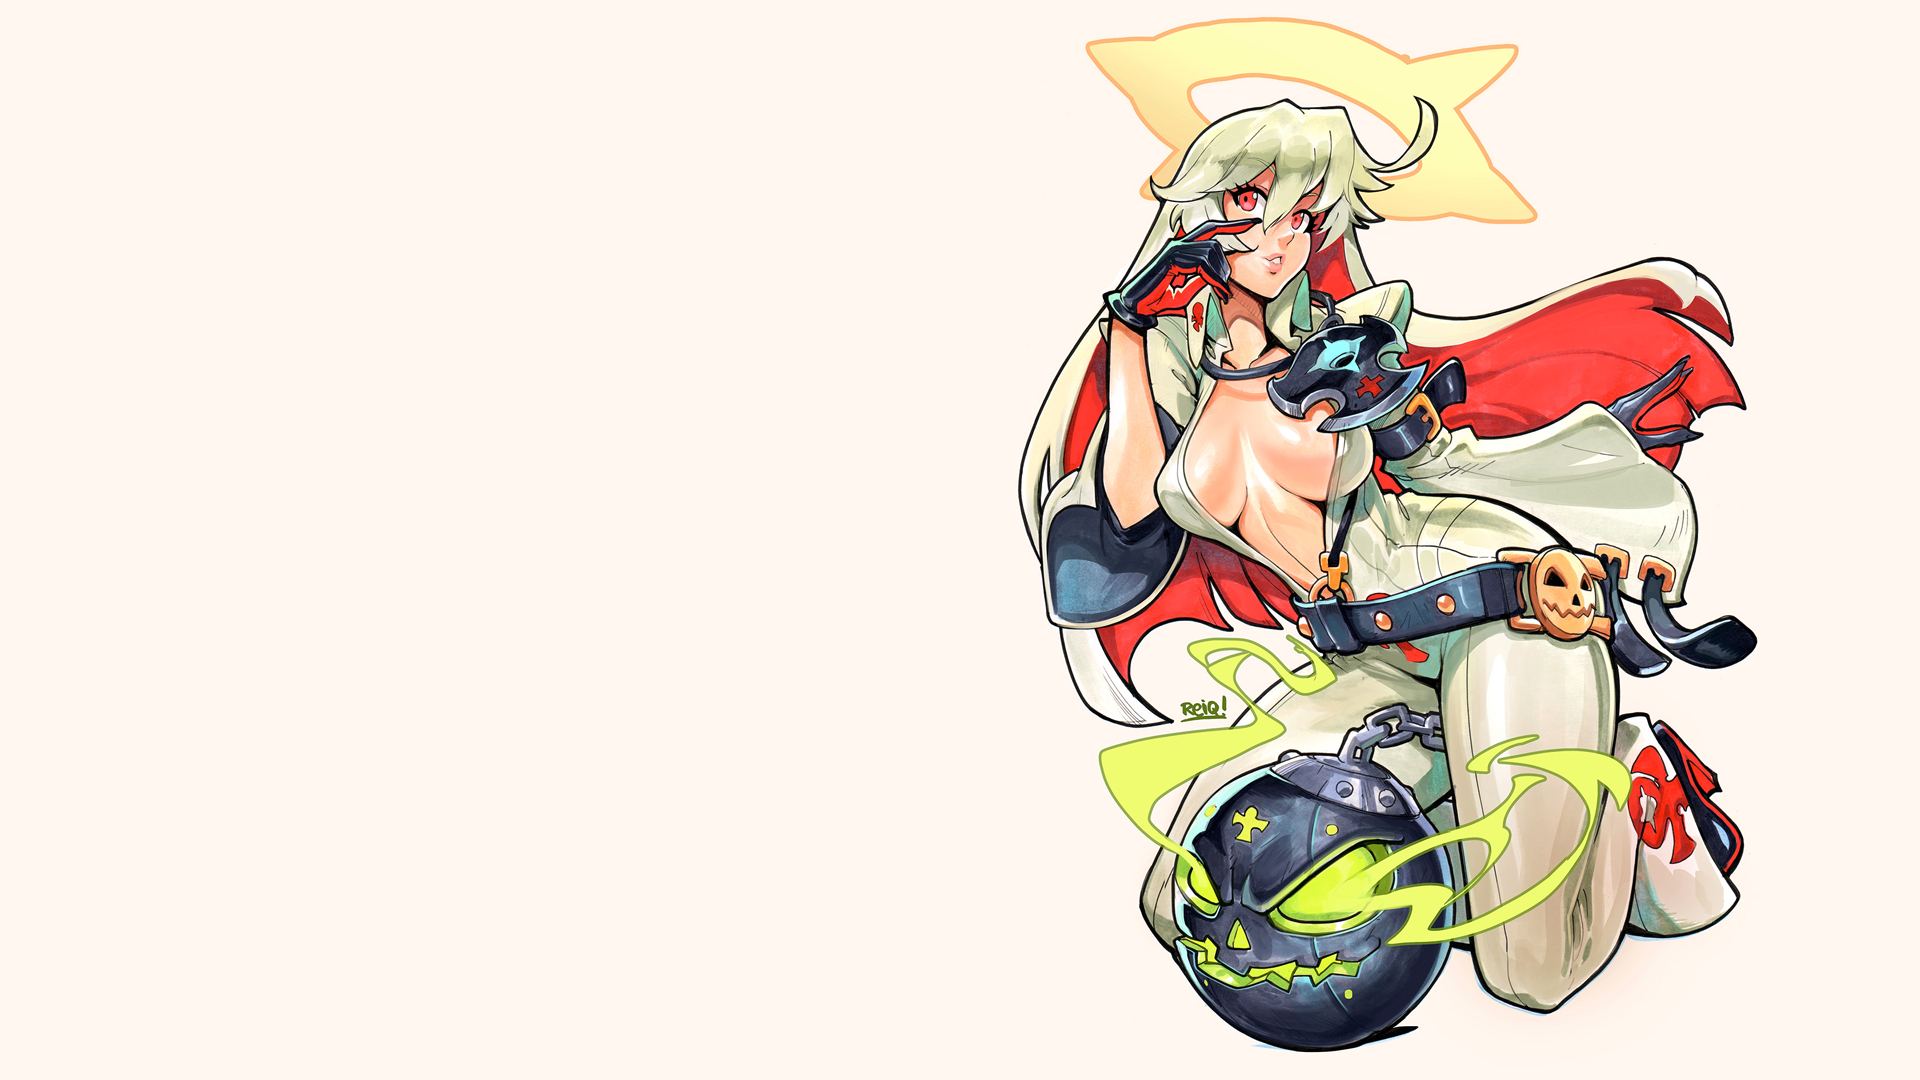 Anime 1920x1080 anime anime girls ecchi simple background Guilty Gear Guilty Gear Xrd blonde Jack-O thighs thigh-highs cleavage reiq